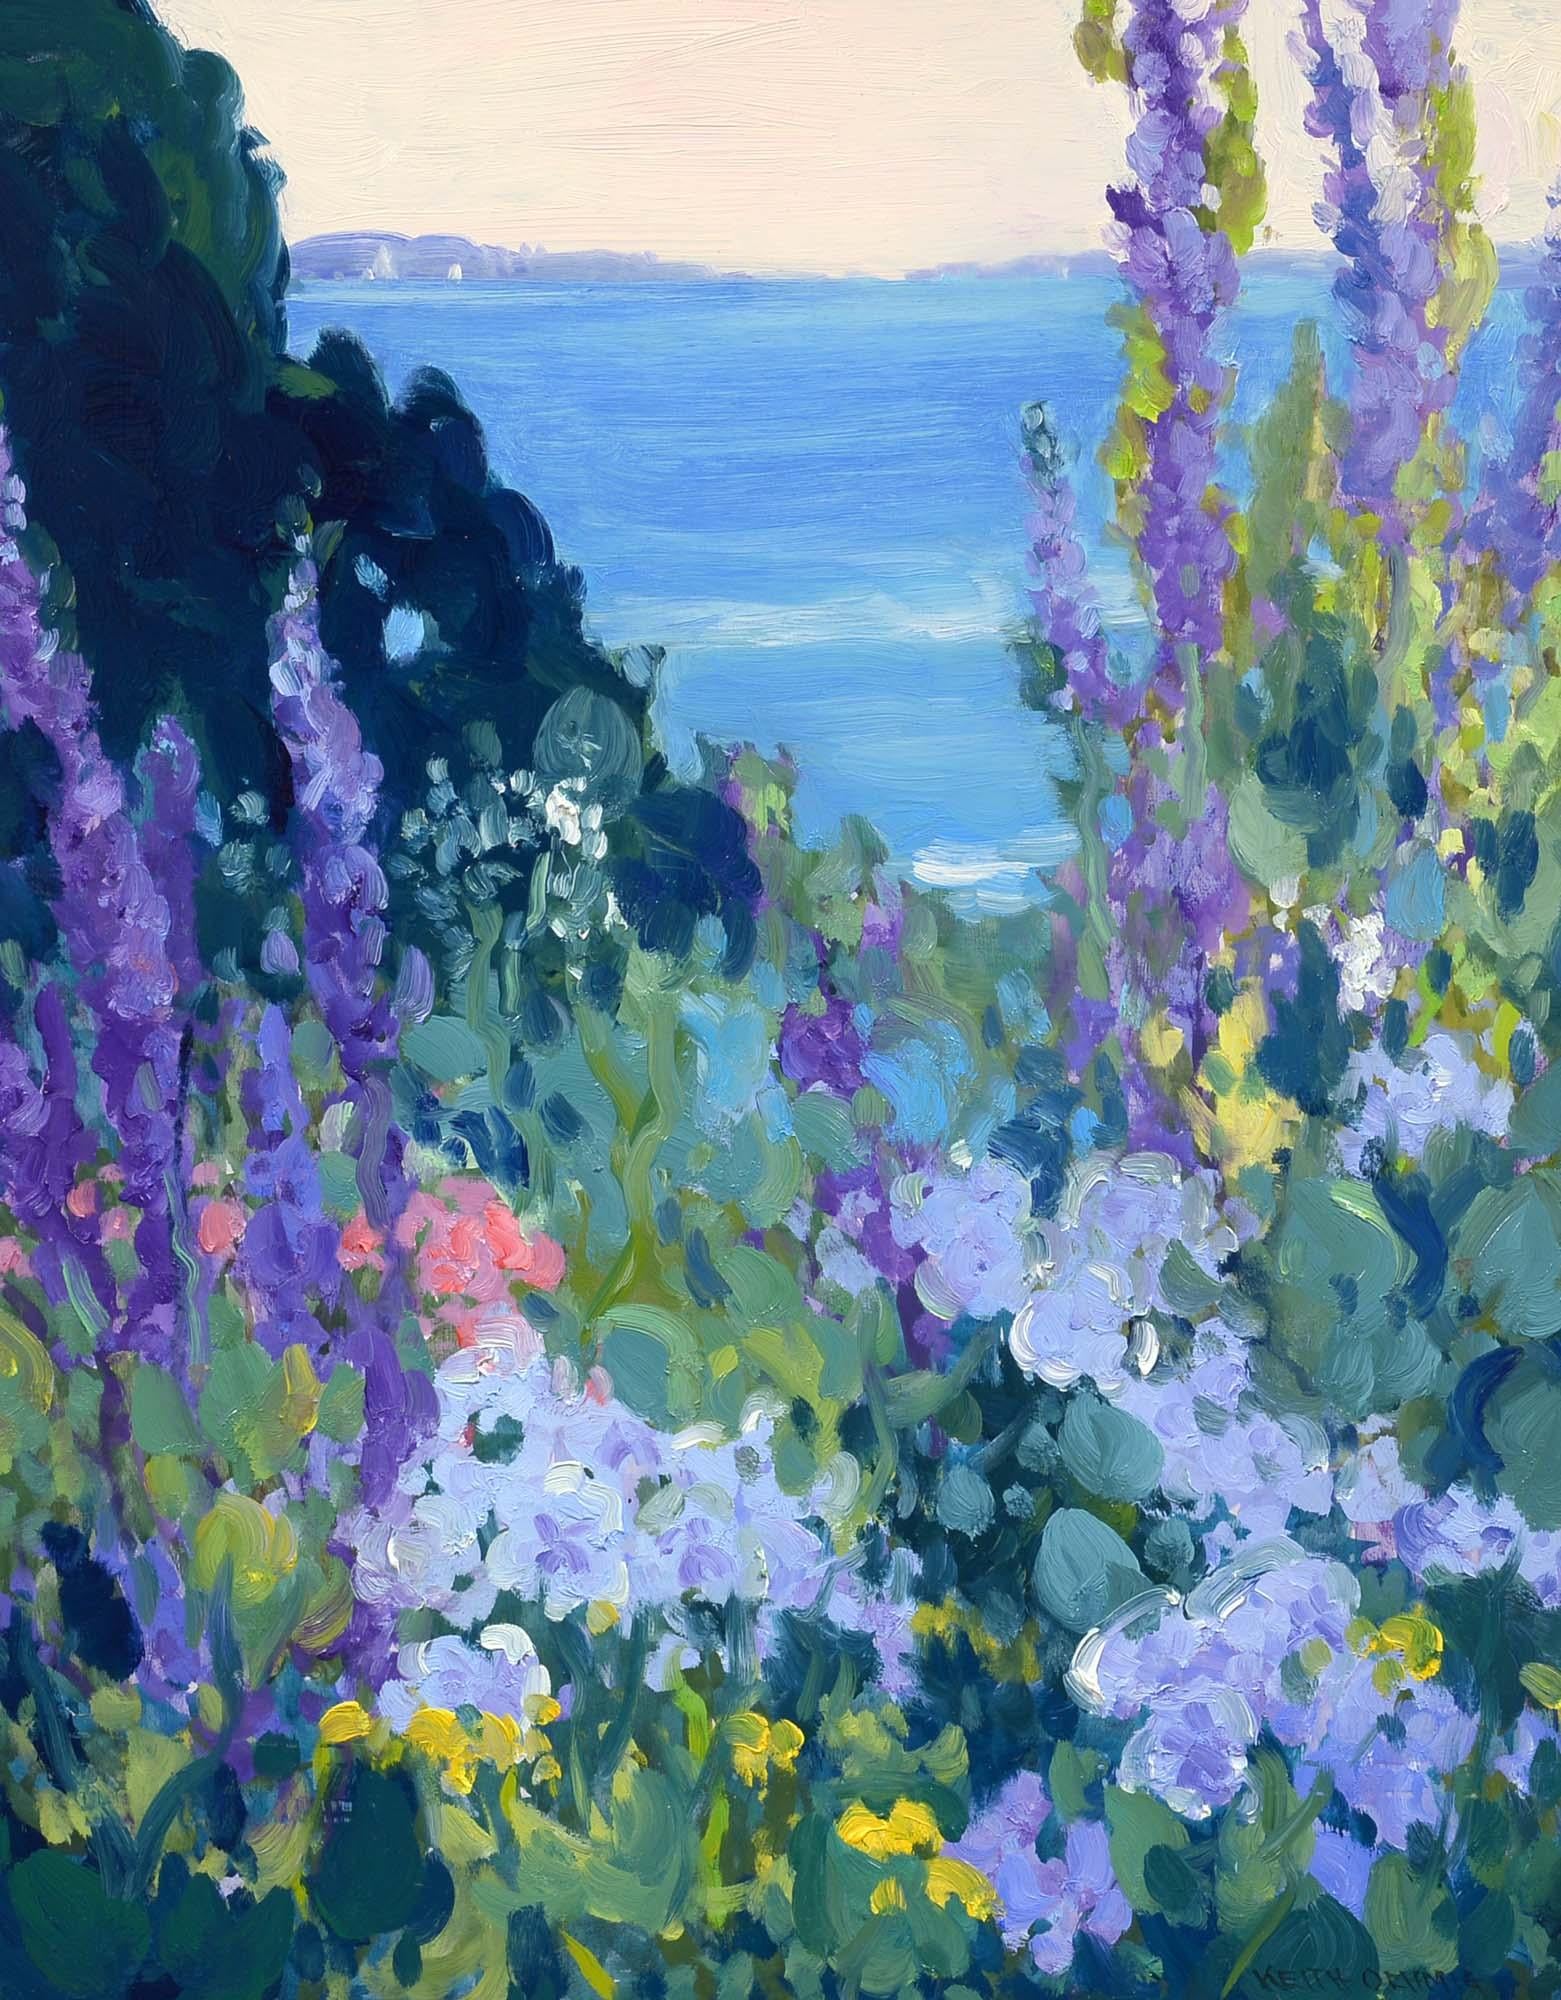 Keith Oehmig Landscape Painting - Summer Garden, Harpswell, Maine, Flowers, Coastal, Landscape, Impressionist, Oil